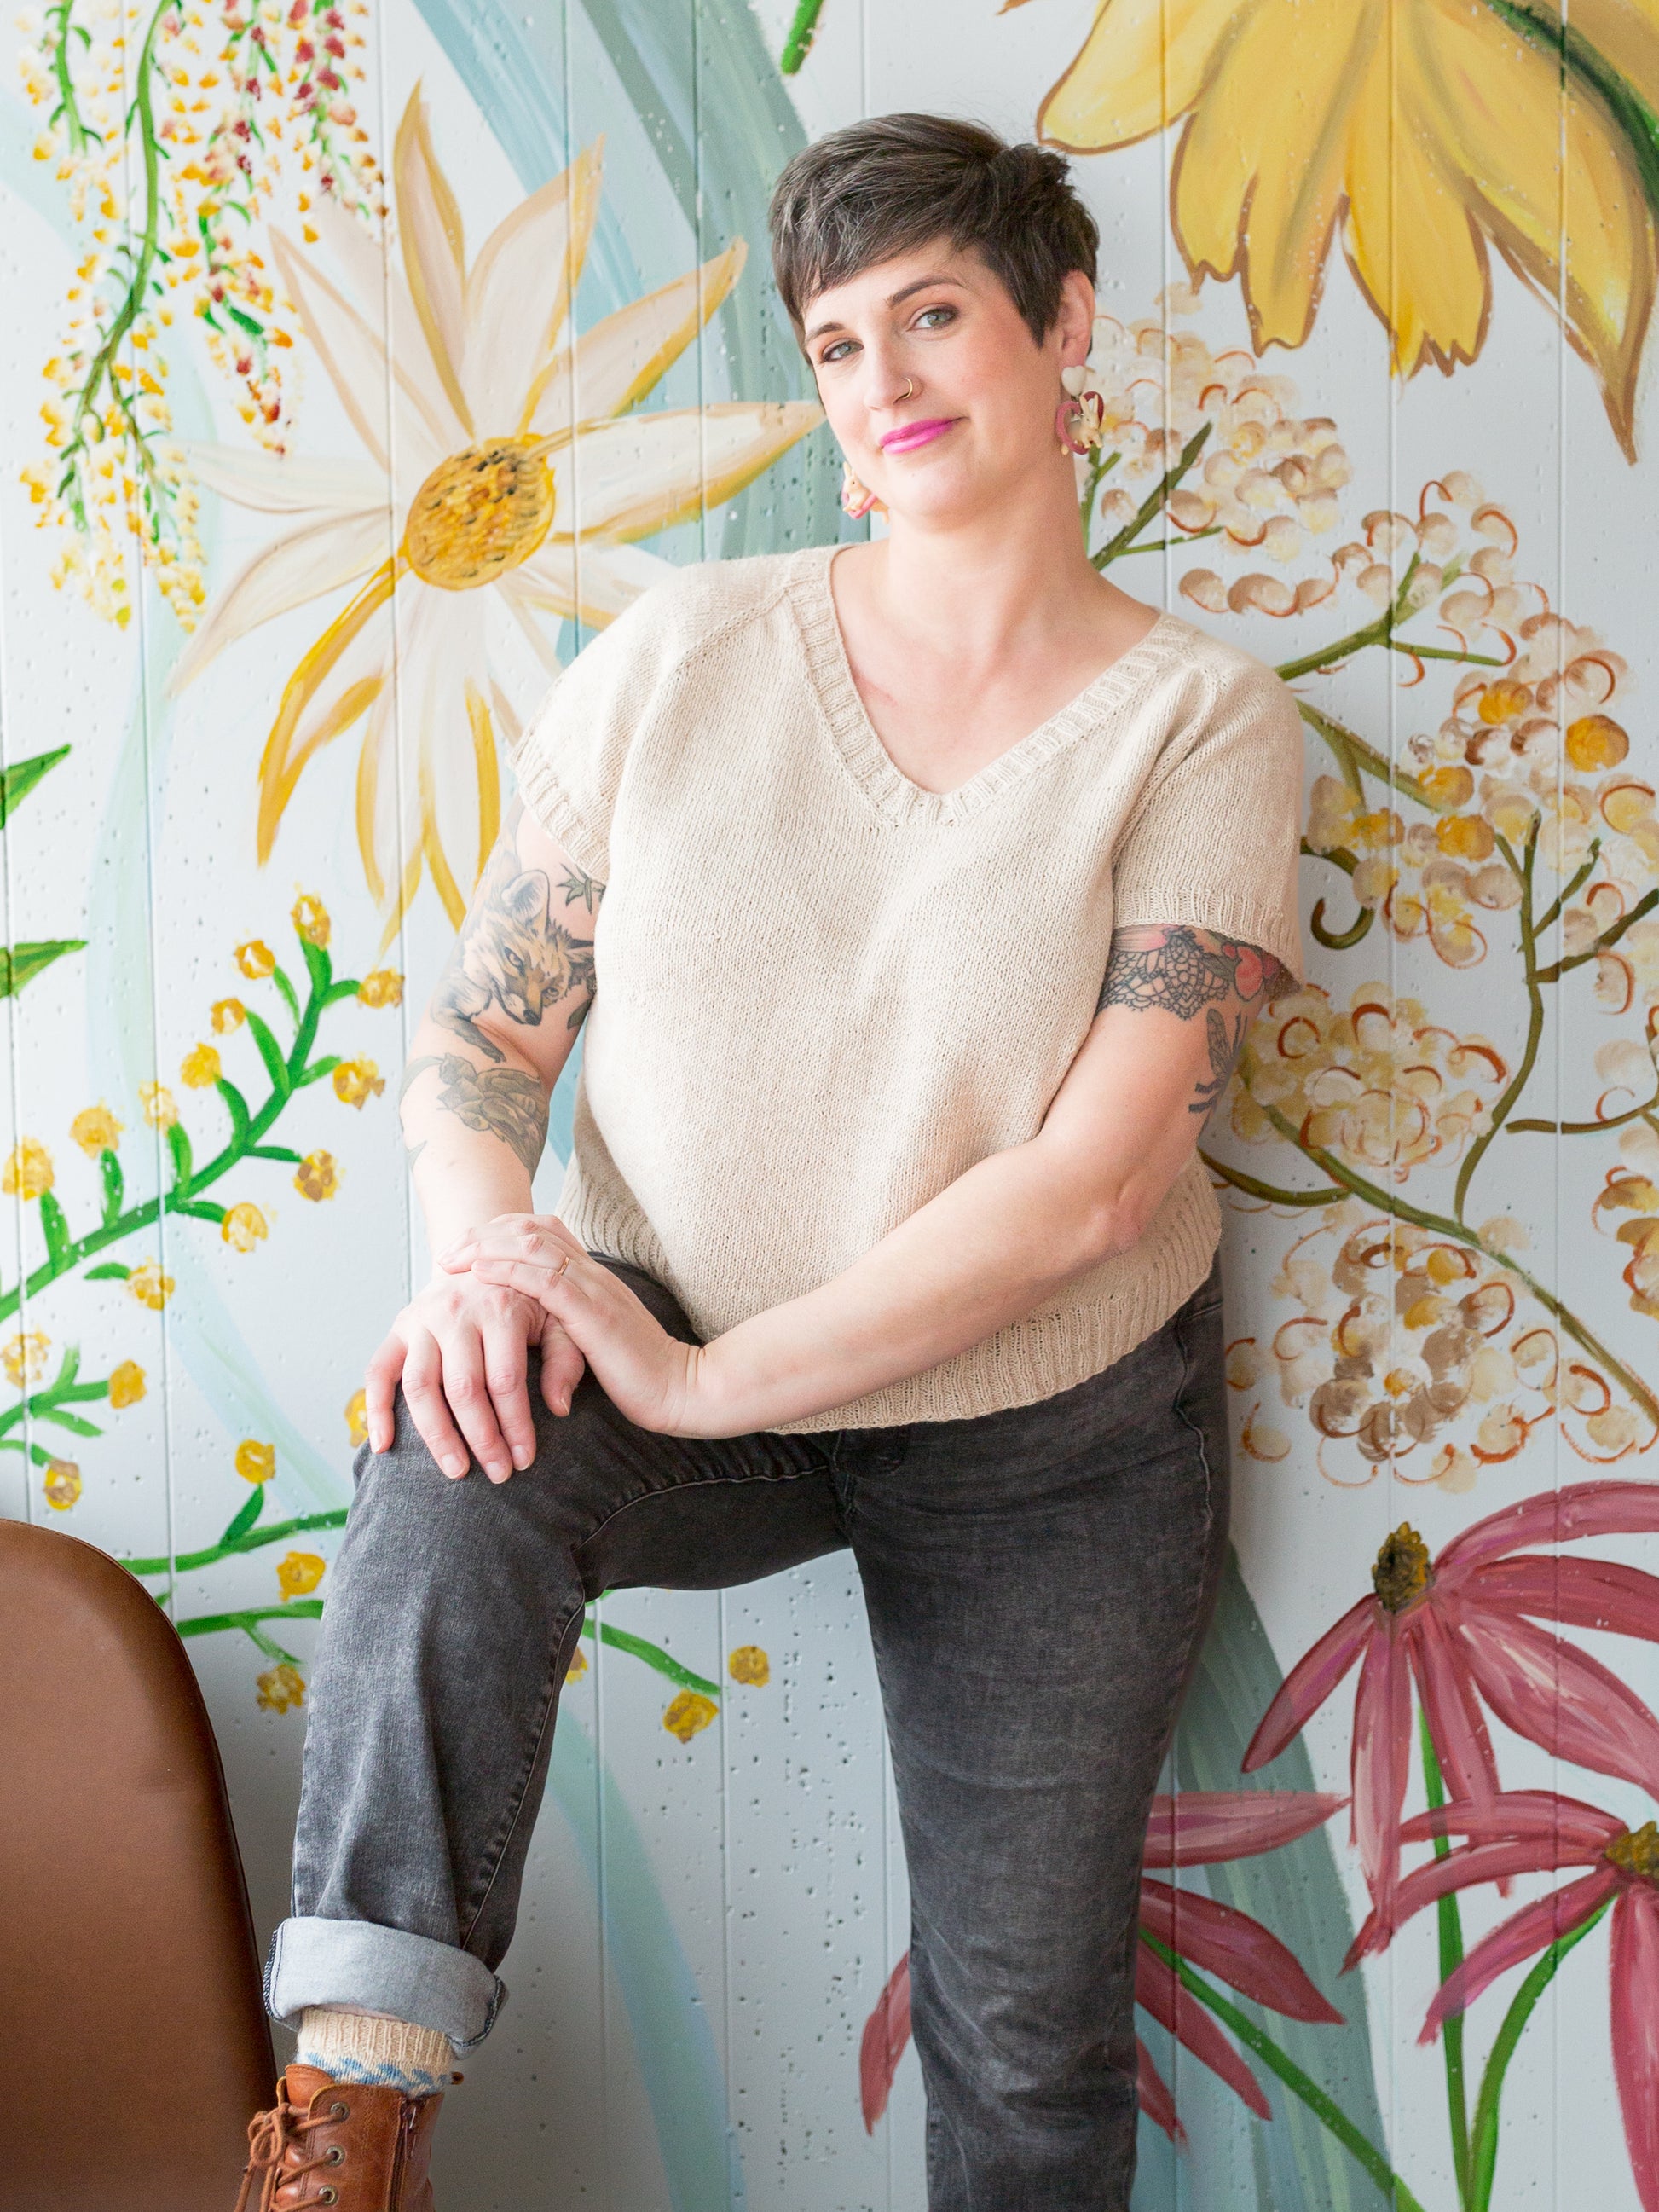 Jen stands, smiling at the camera, wearing a tee knit with light beige yarn with grey jeans and brown boots. A floral wall mural can be seen in the background.